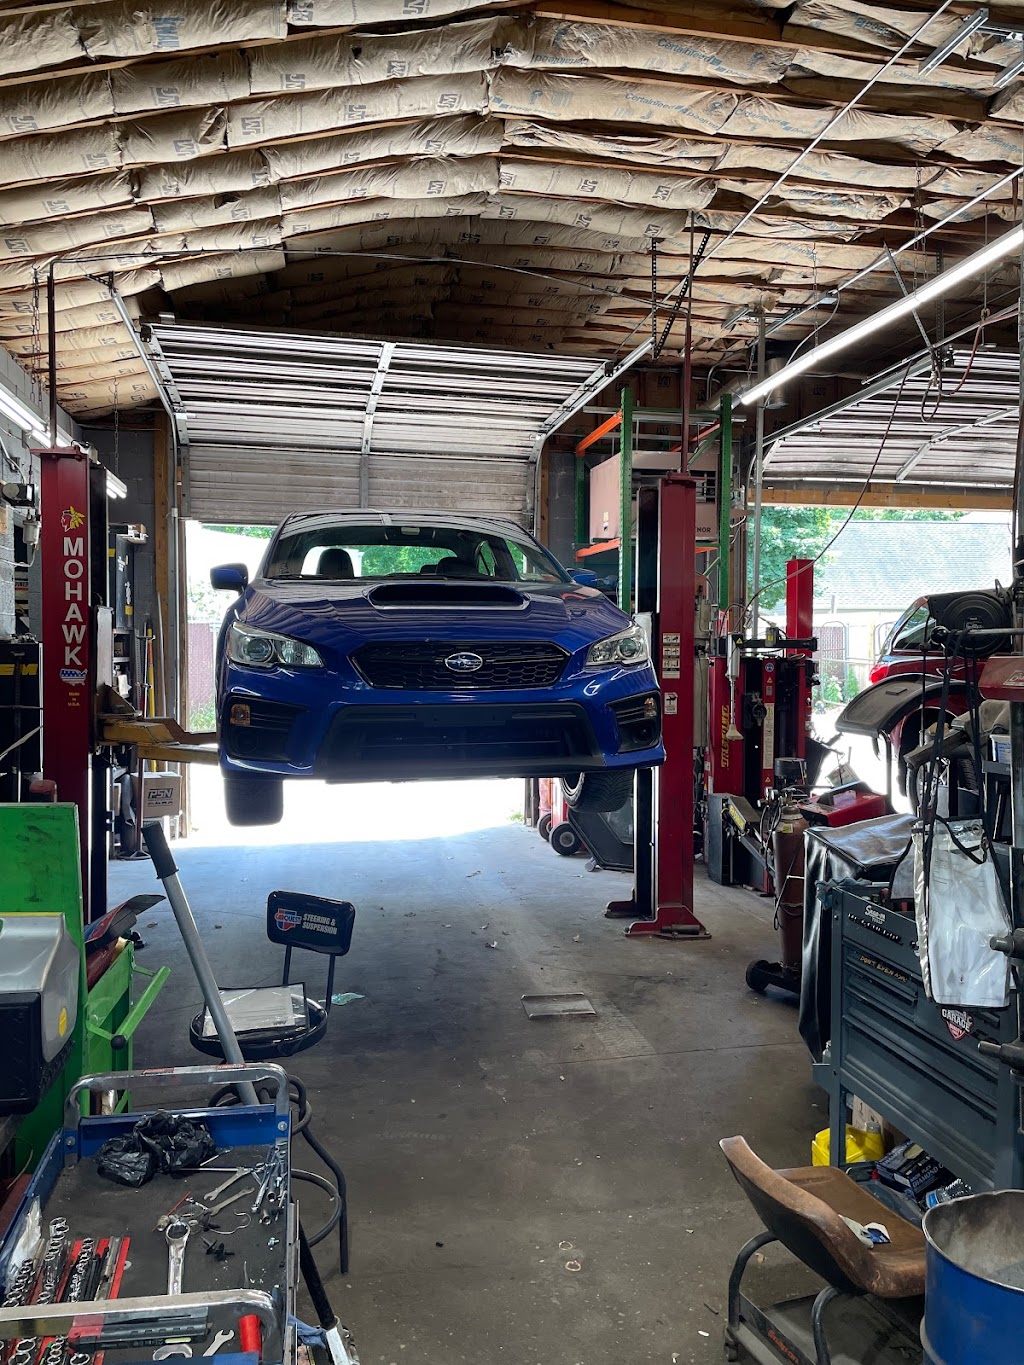 A & R Alignment and Auto Repair | 376 E Main St, Smithtown, NY 11787 | Phone: (631) 825-9189